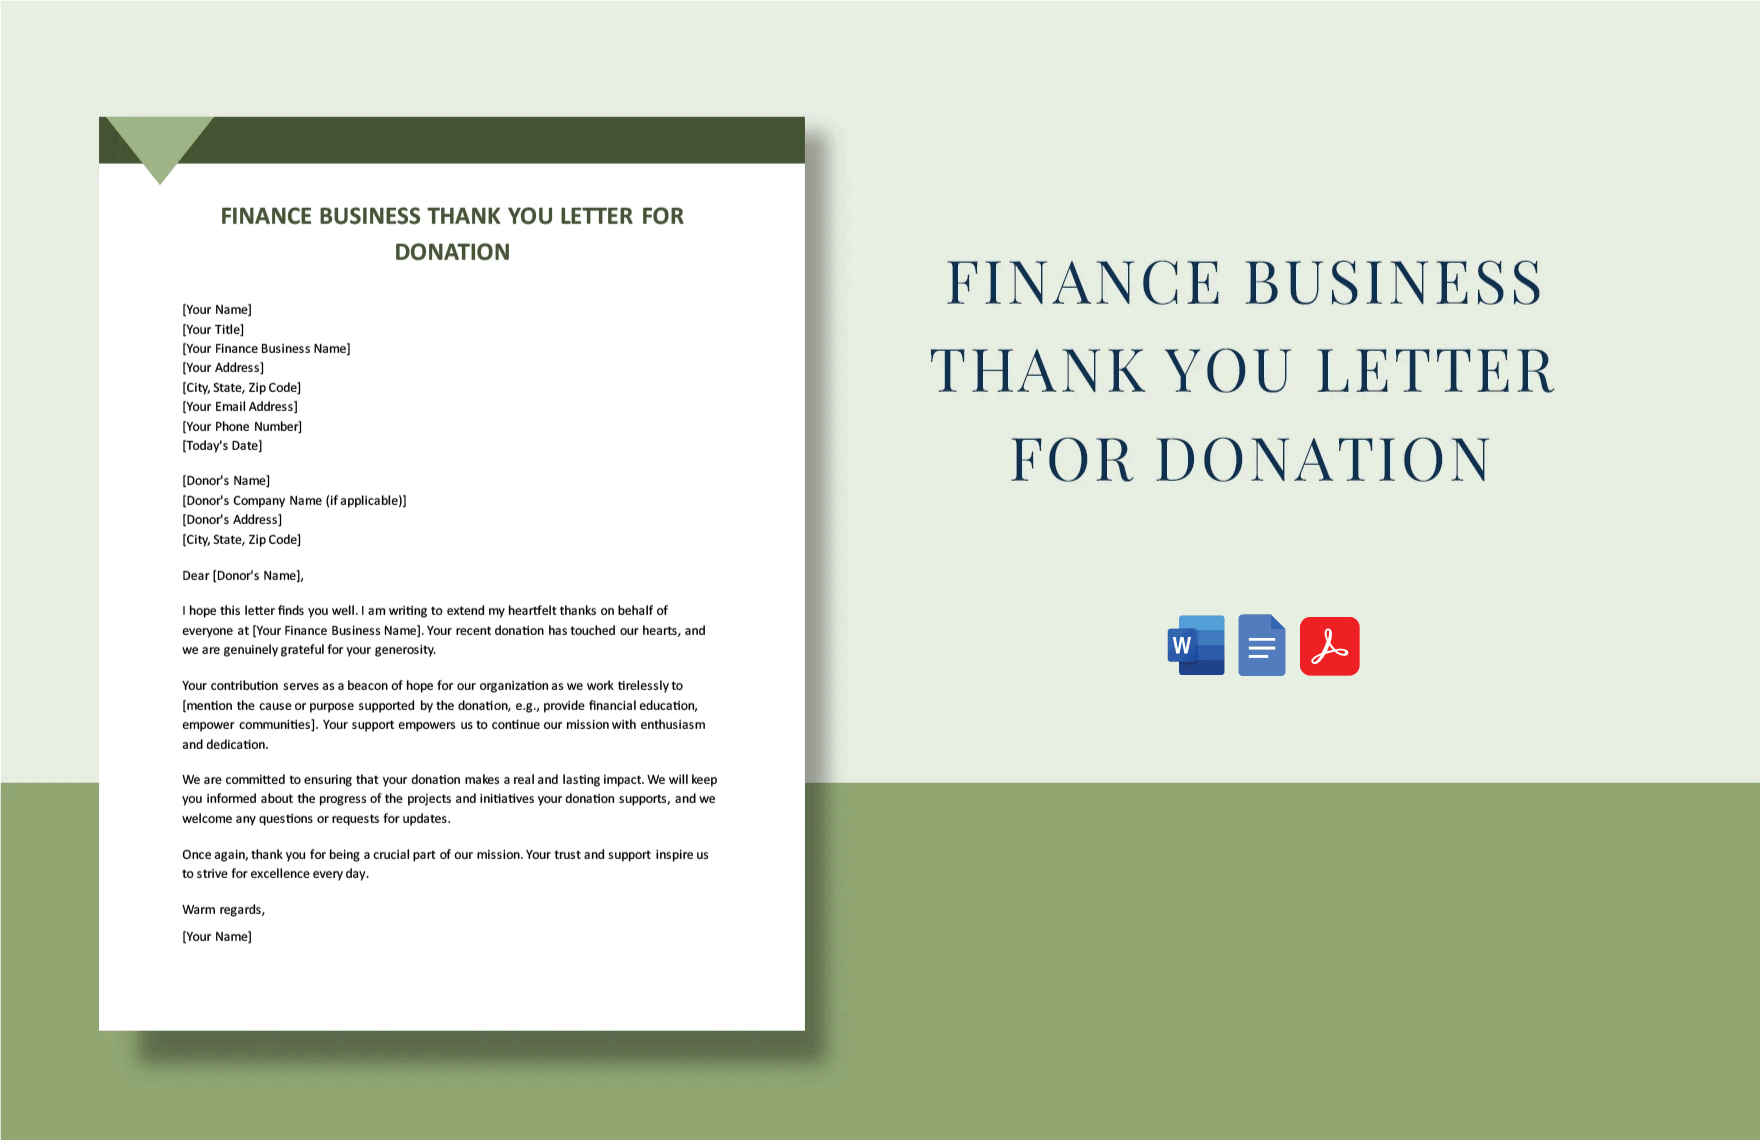 Finance Business Thank You Letter for Donation Template in Word, Google Docs, PDF